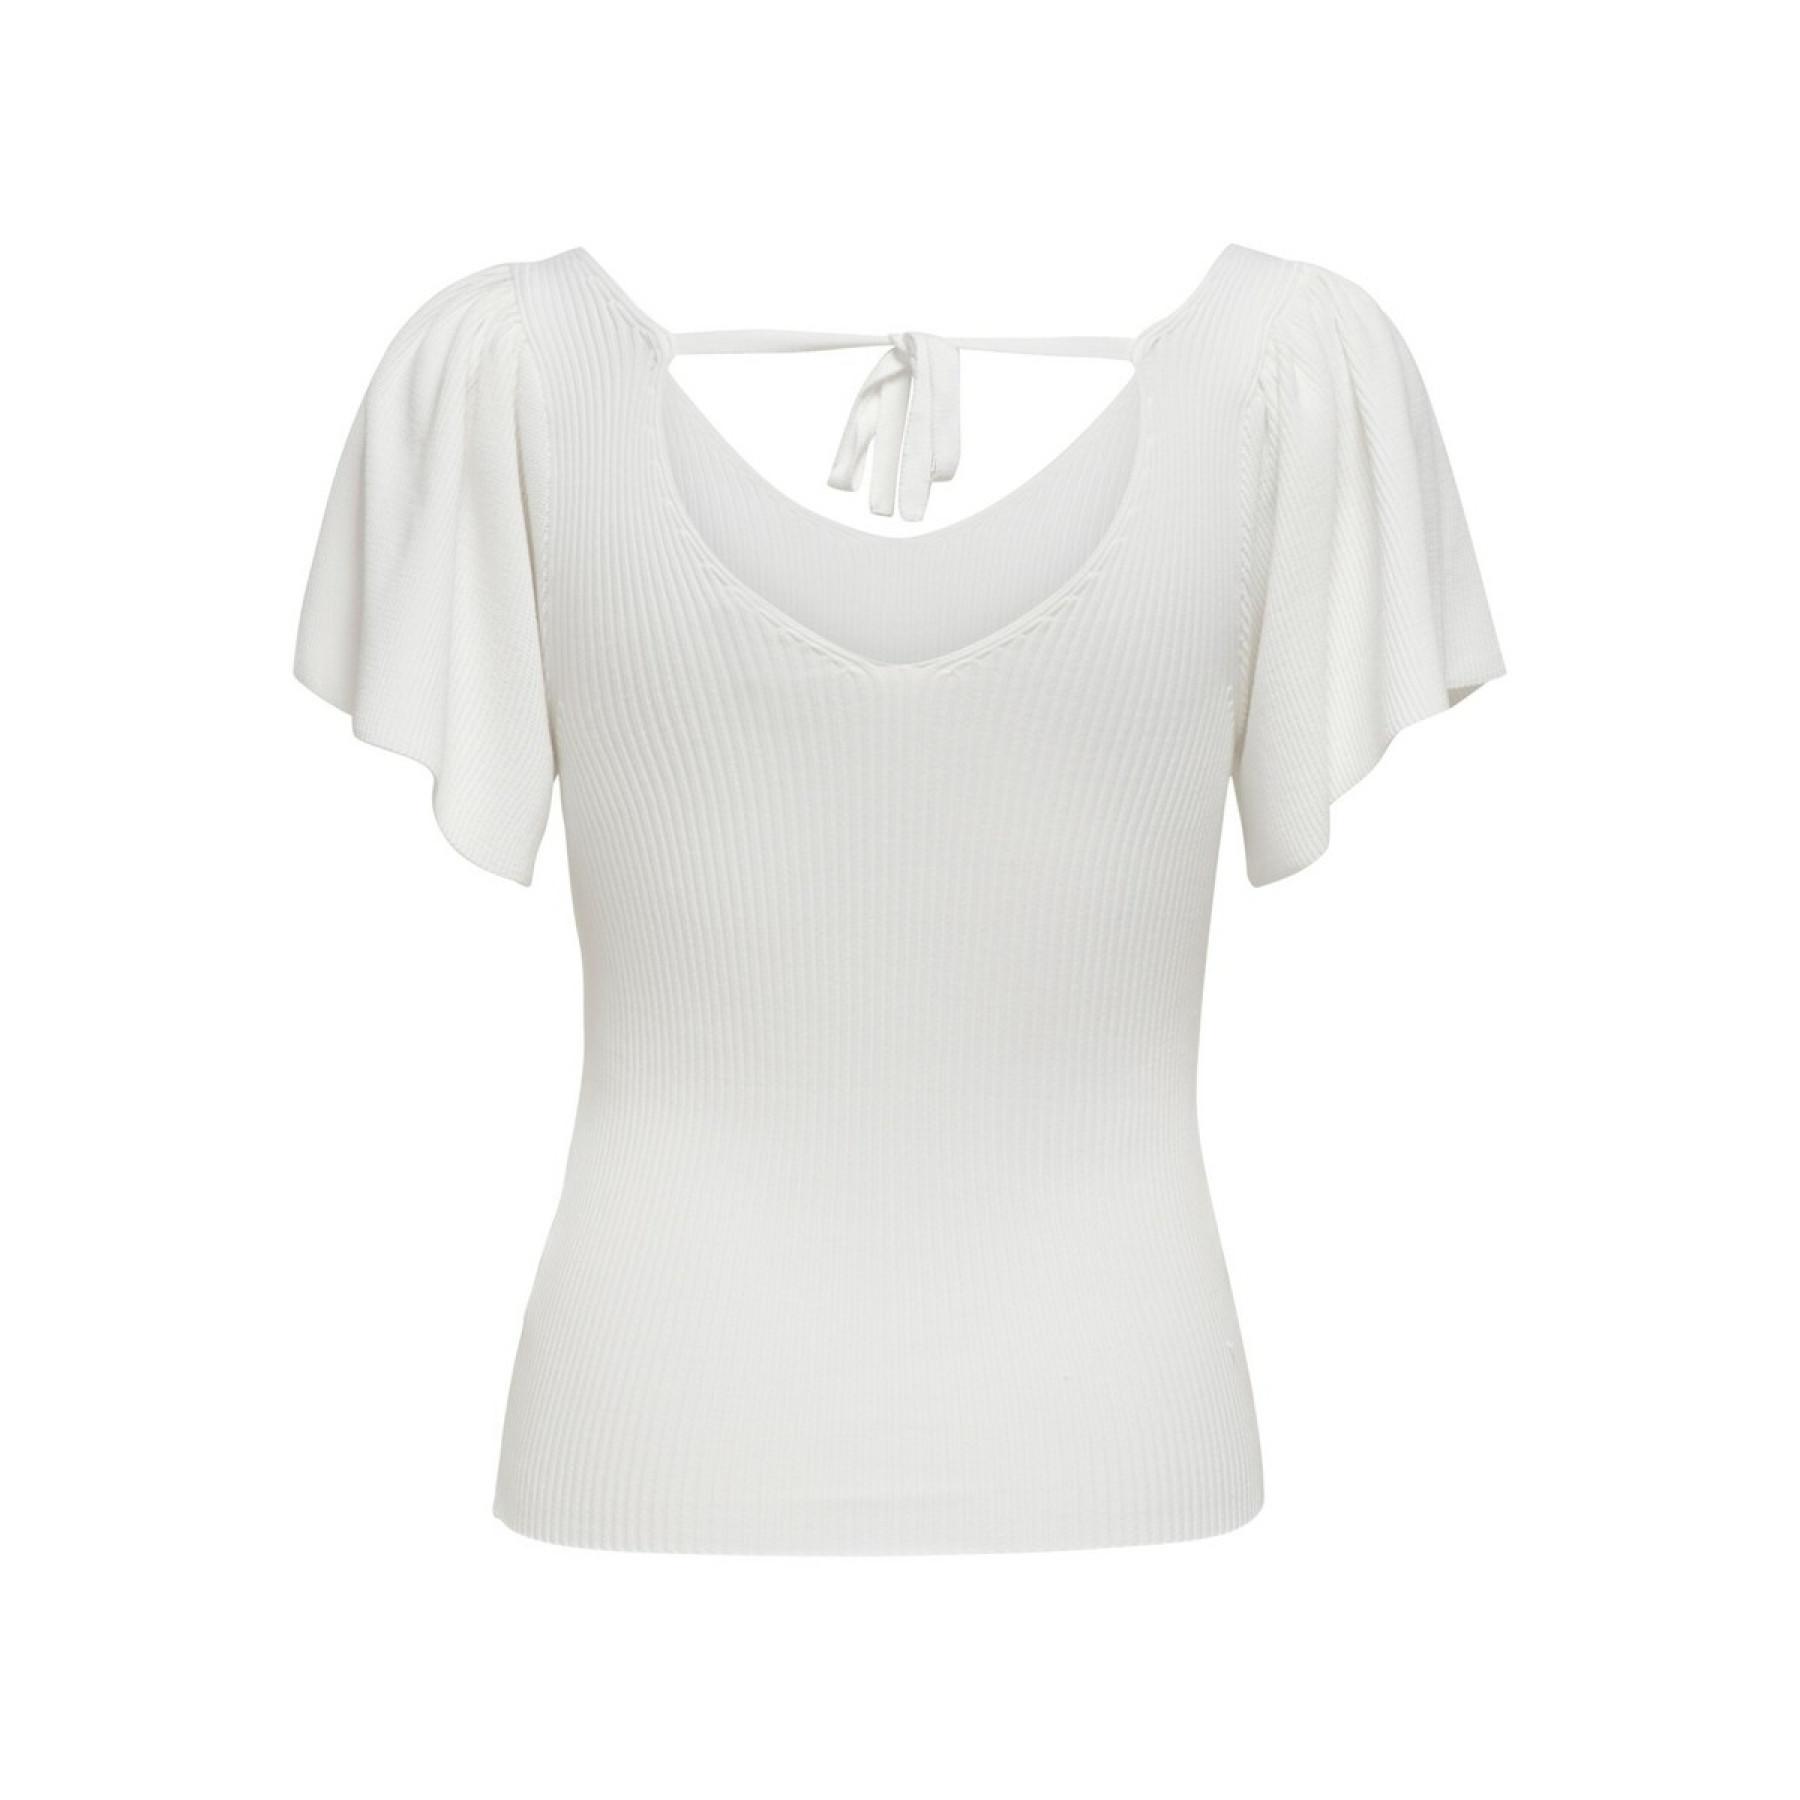 Women's top Only Leelo manches courtes